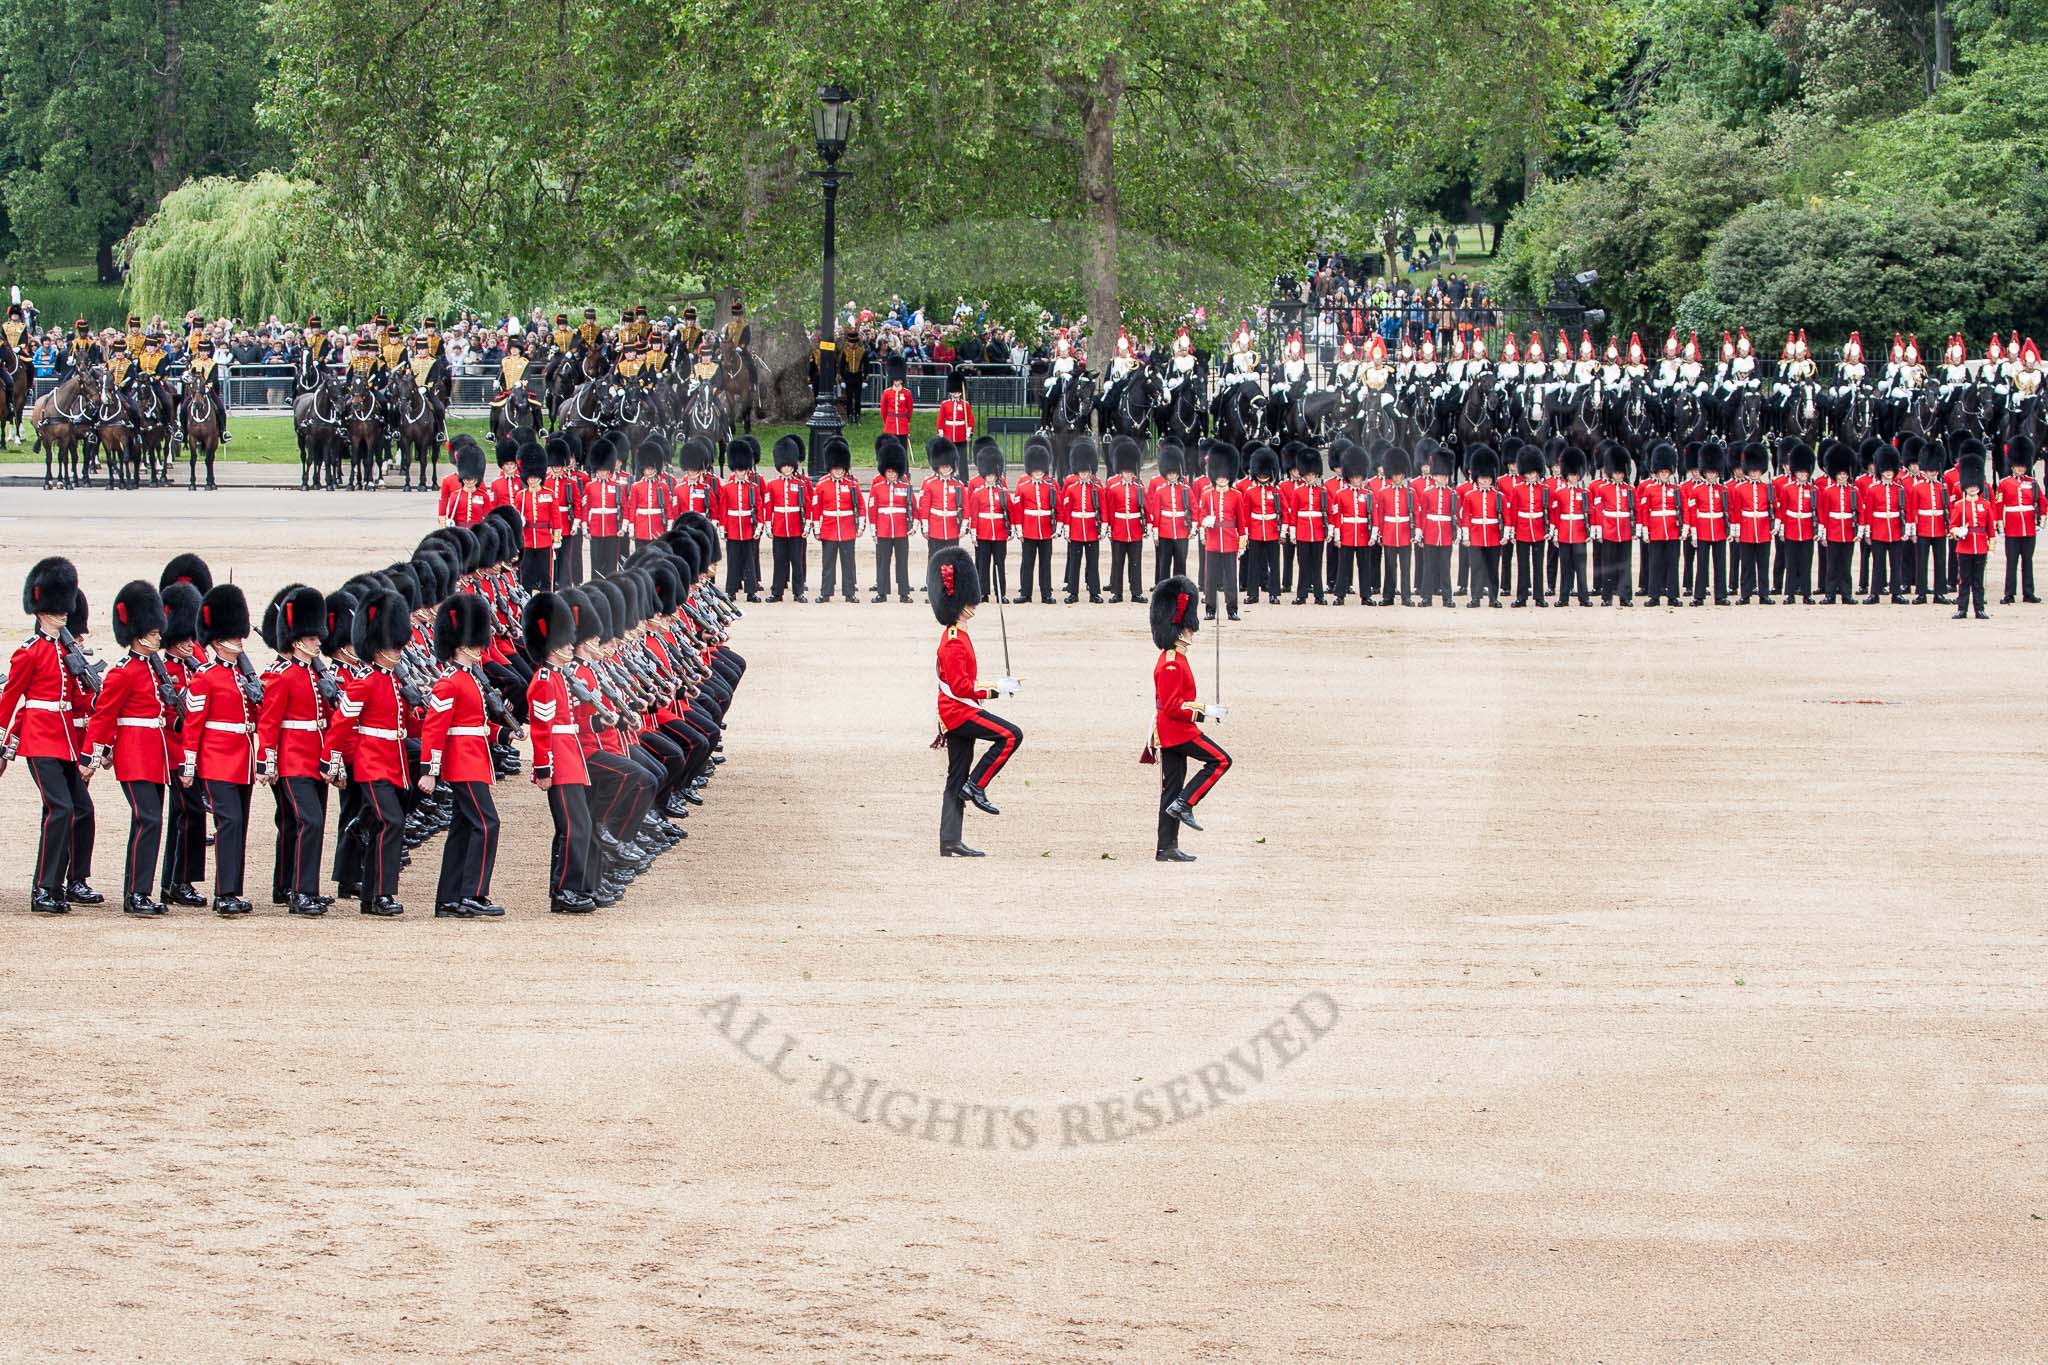 The Colonel's Review 2012: No. 1 Guard (Escort for the Colour), 1st Battalion Coldstream Guards, getting ready for the Collection of the Colour..
Horse Guards Parade, Westminster,
London SW1,

United Kingdom,
on 09 June 2012 at 11:15, image #254